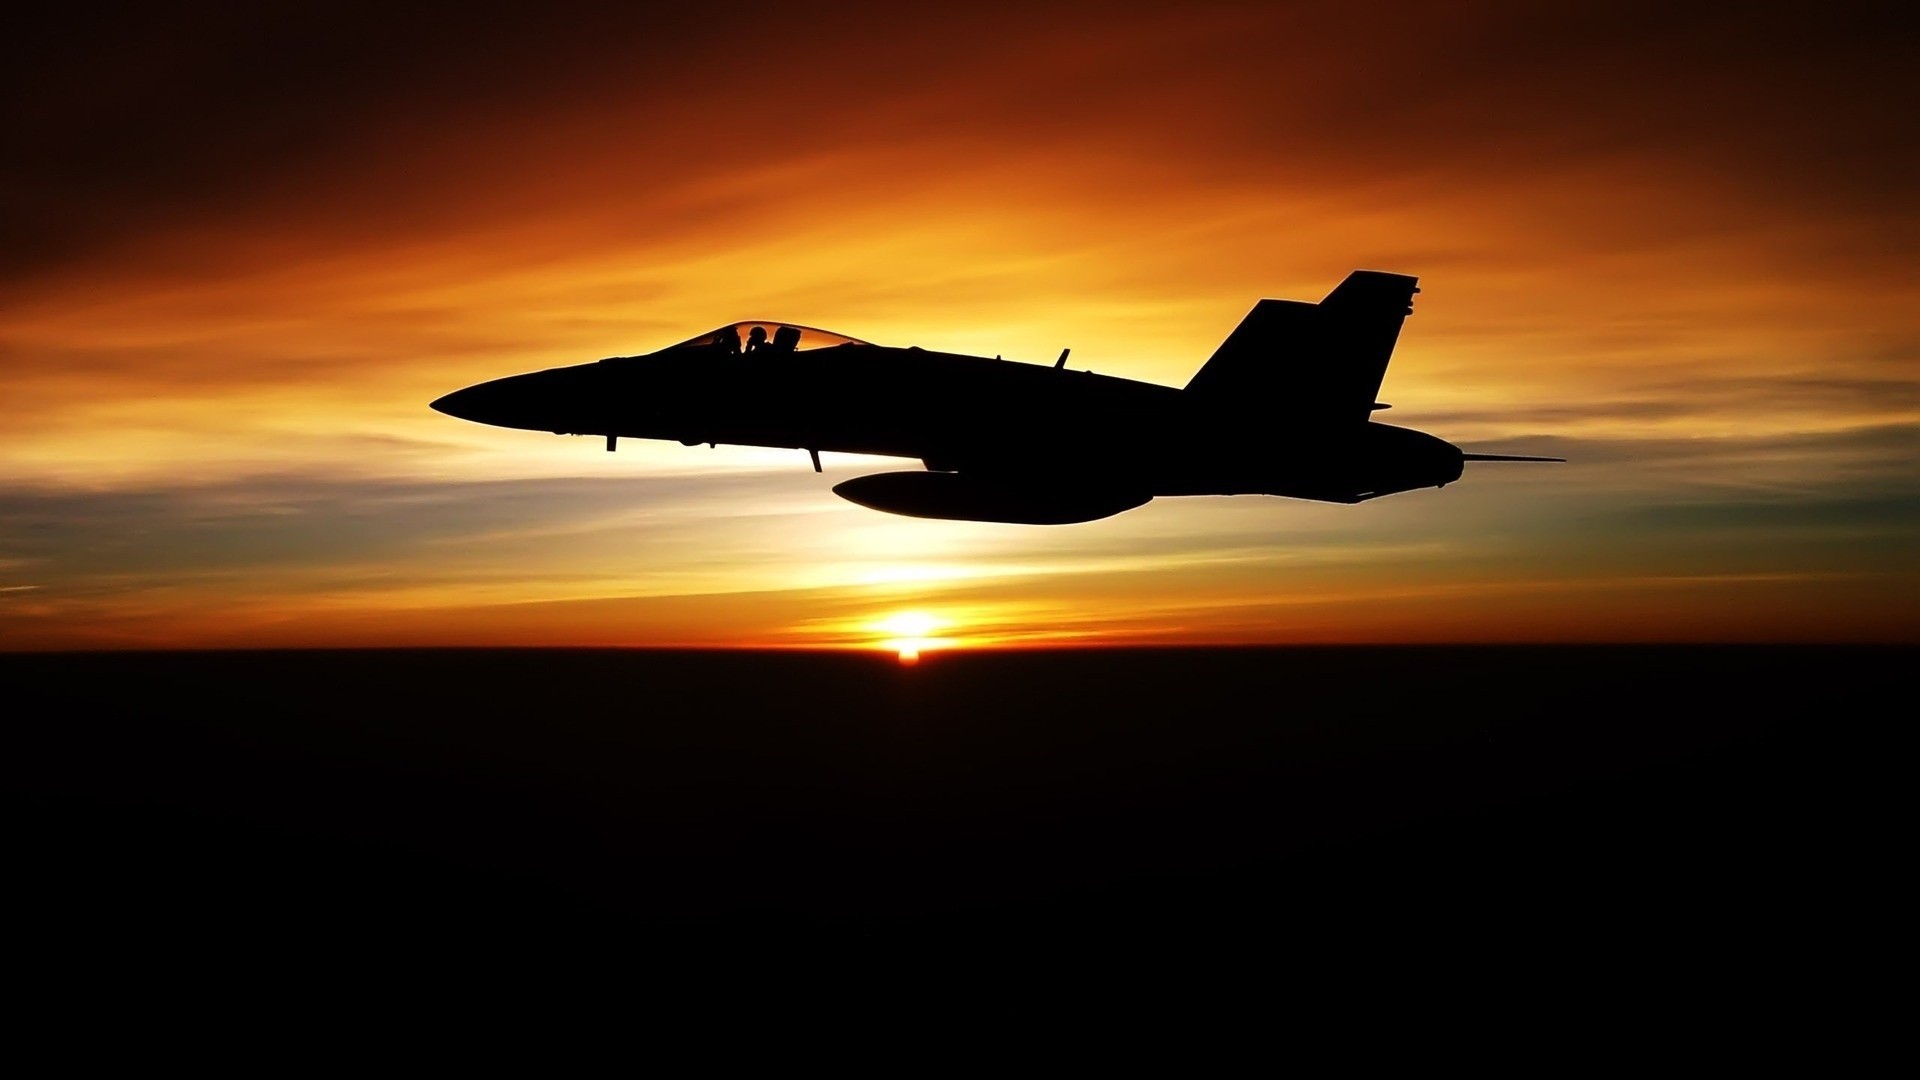 General 1920x1080 aircraft sunset military aircraft silhouette McDonnell Douglas F/A-18 Hornet vehicle military vehicle sky dark sunlight American aircraft military sunset glow photography McDonnell Douglas clouds airplane dusk pilot